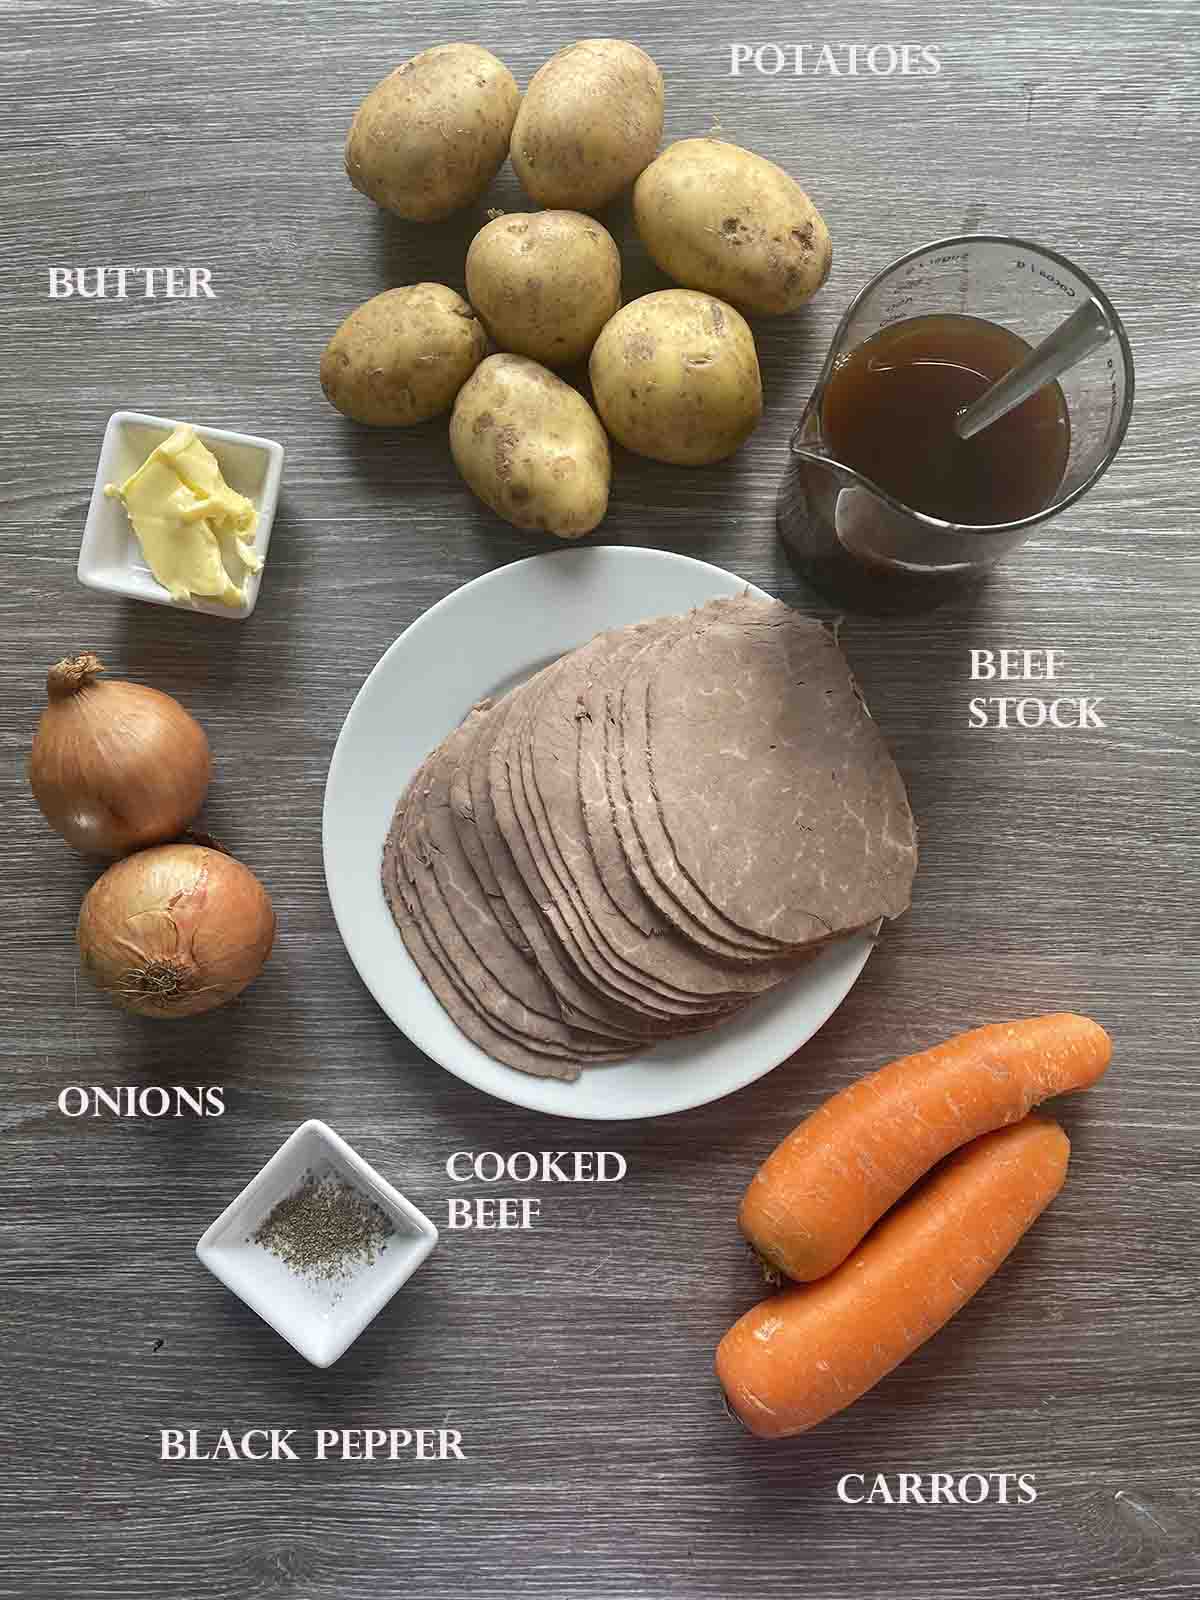 ingredients including roast beef, potatoes and carrots.